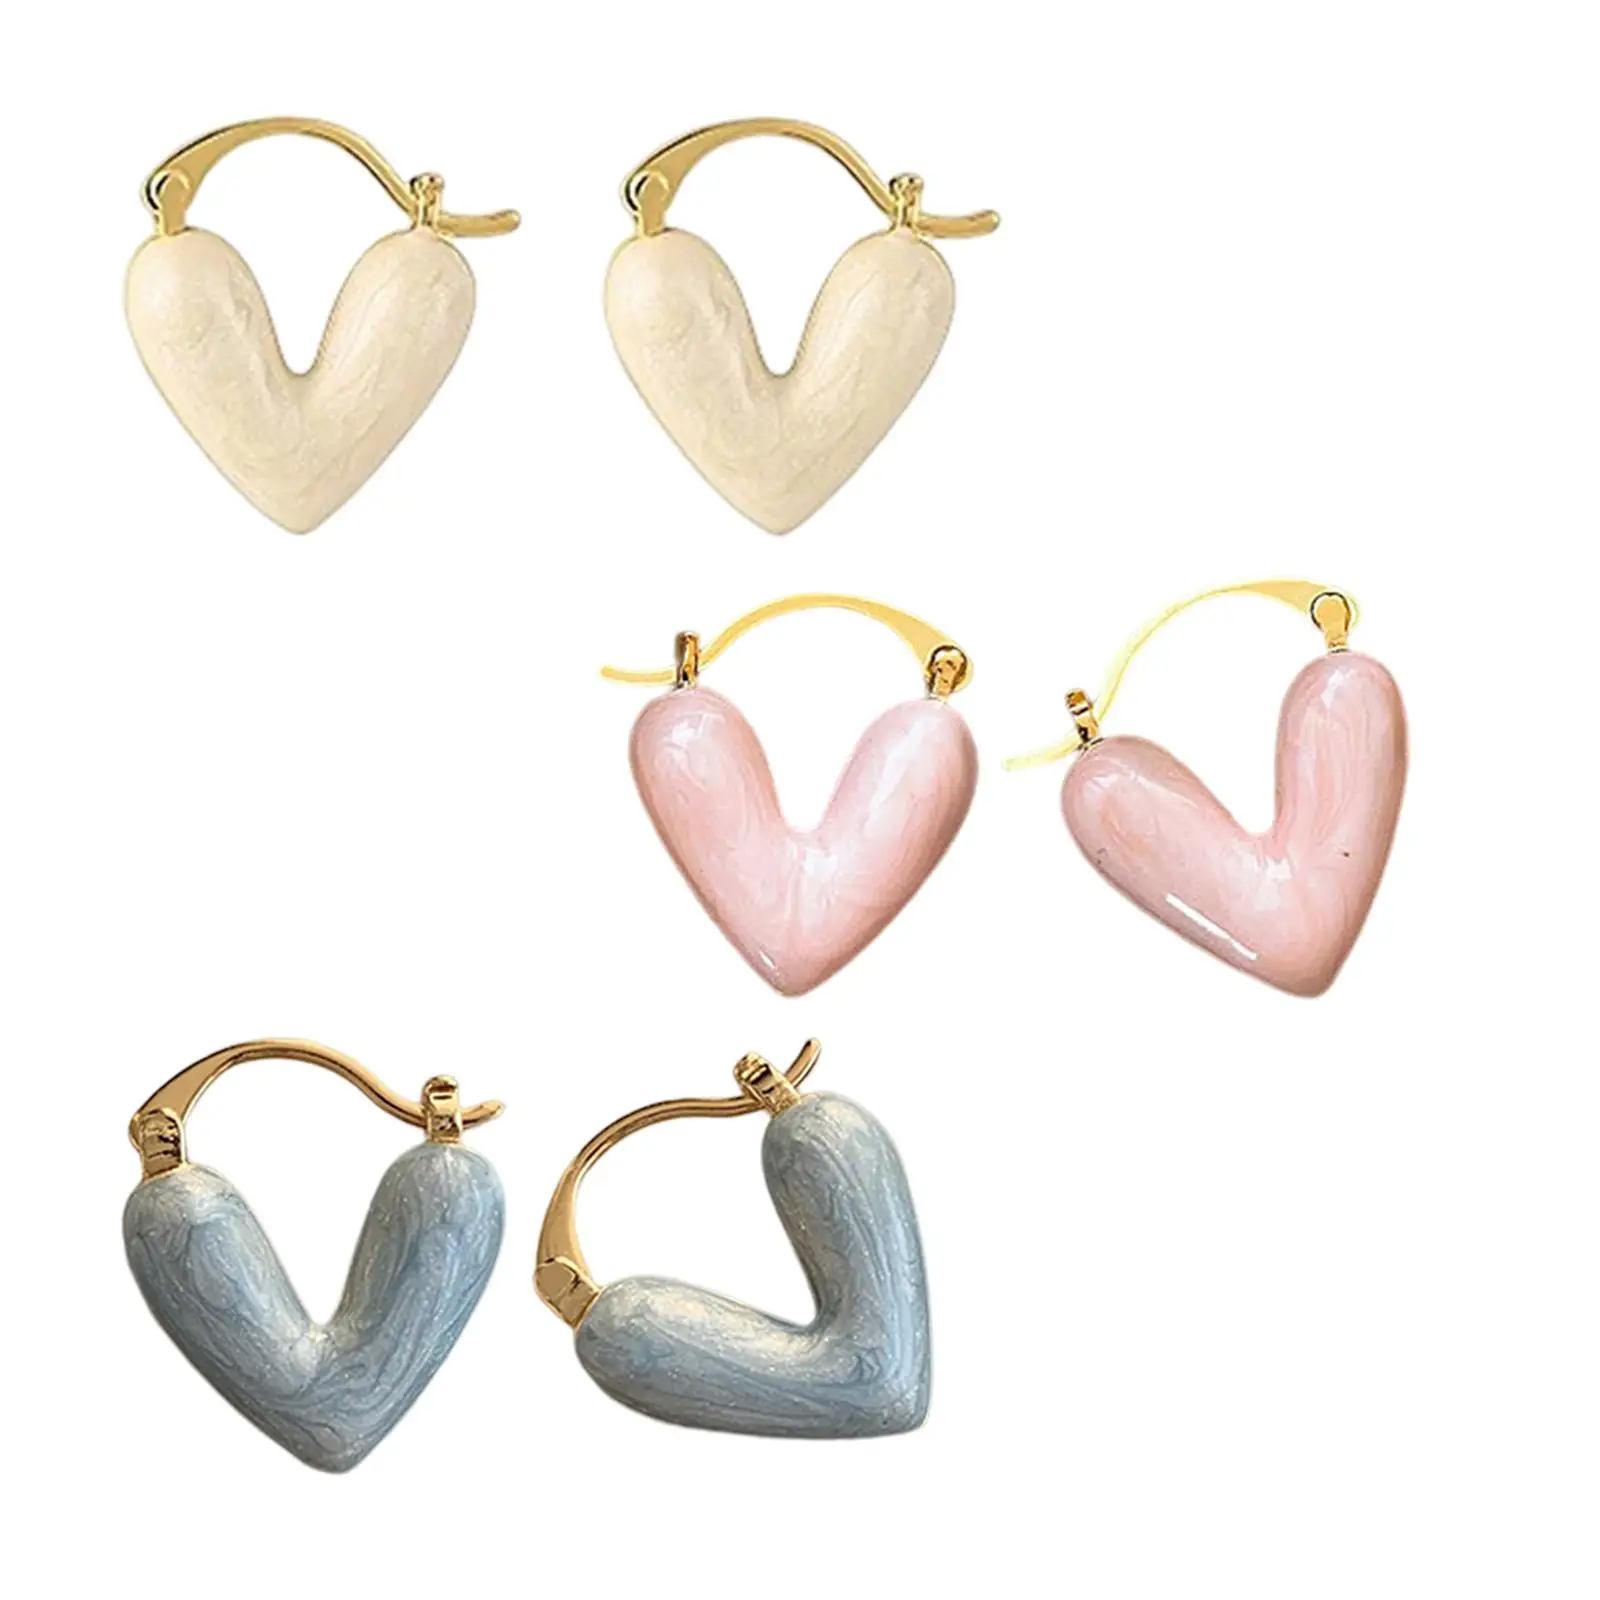 Women Earring Stud Heart Shaped Drop Earrings Jewelry Cool for Formal Suit, Casual Clothing or Evening Dress Accessory Elegant